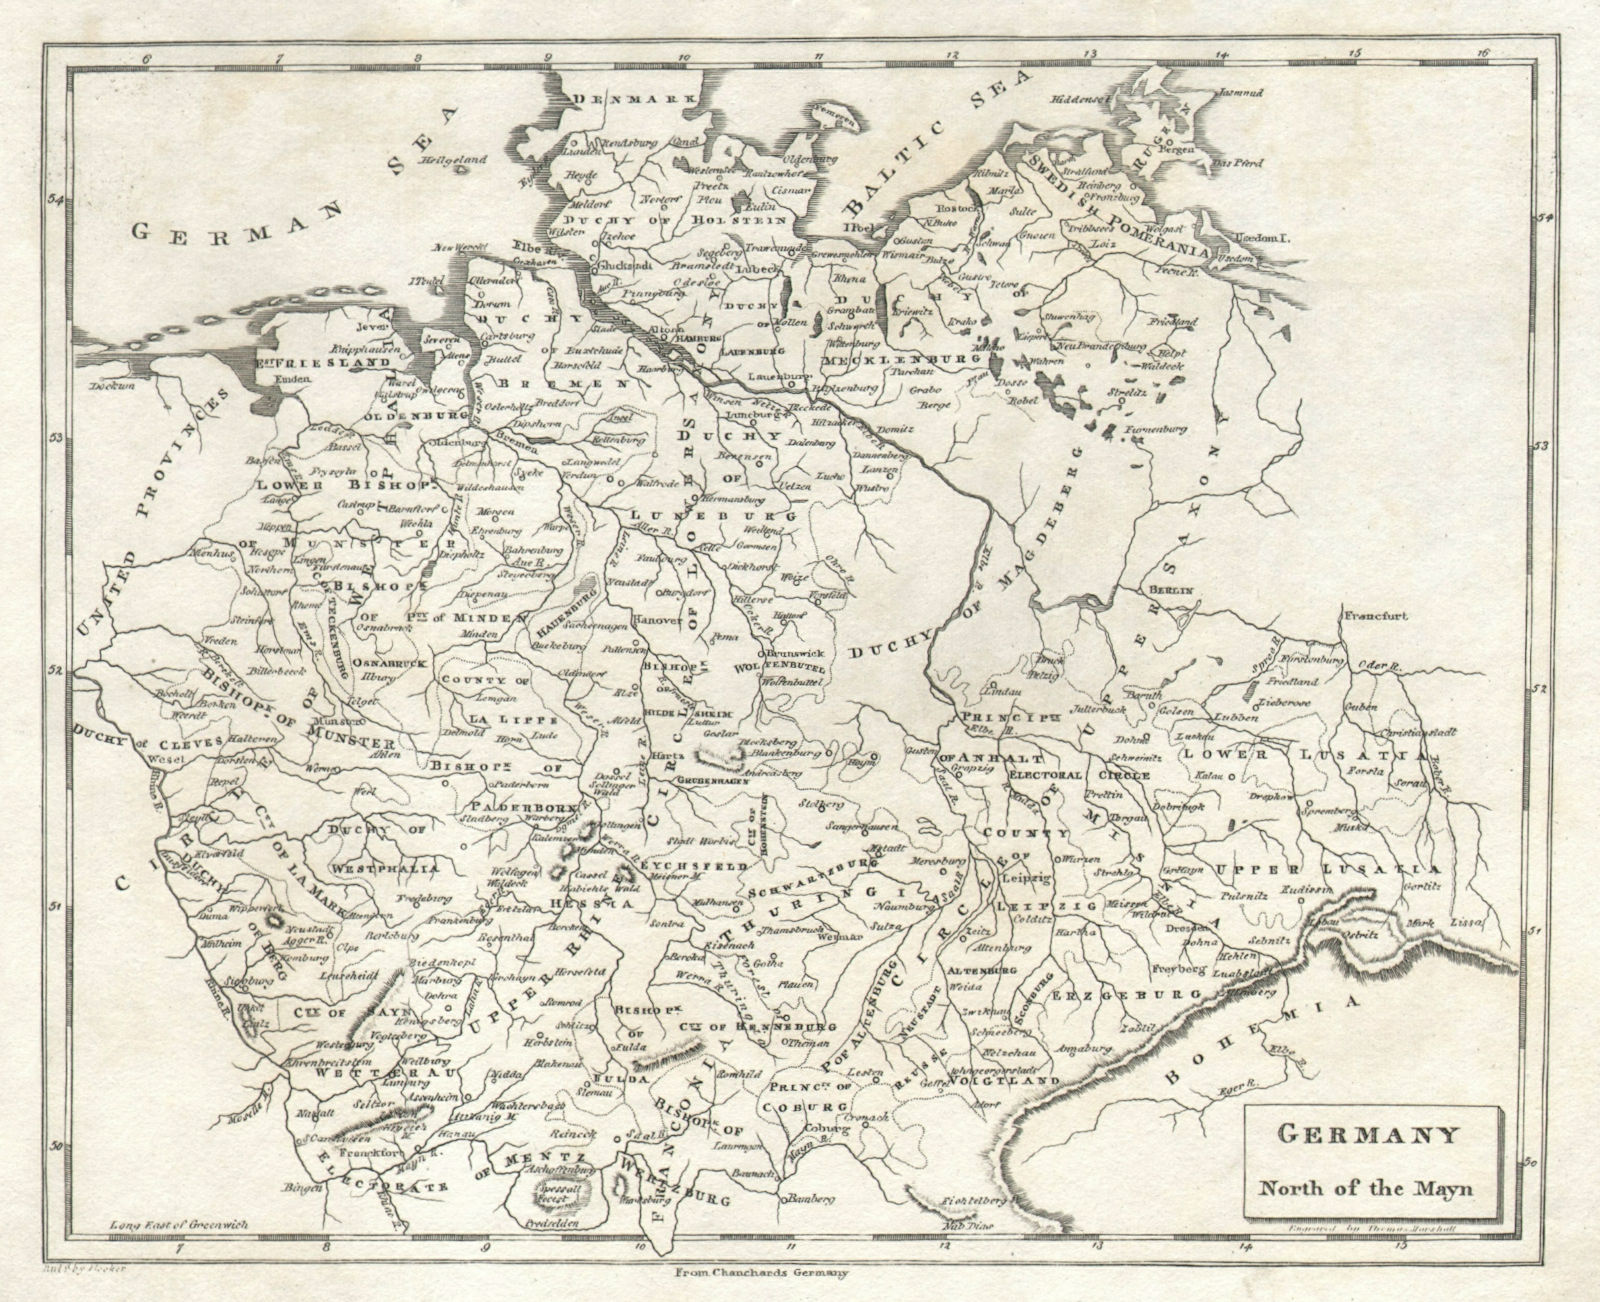 Associate Product Germany North of the Mayn by Arrowsmith & Lewis 1812 old antique map chart